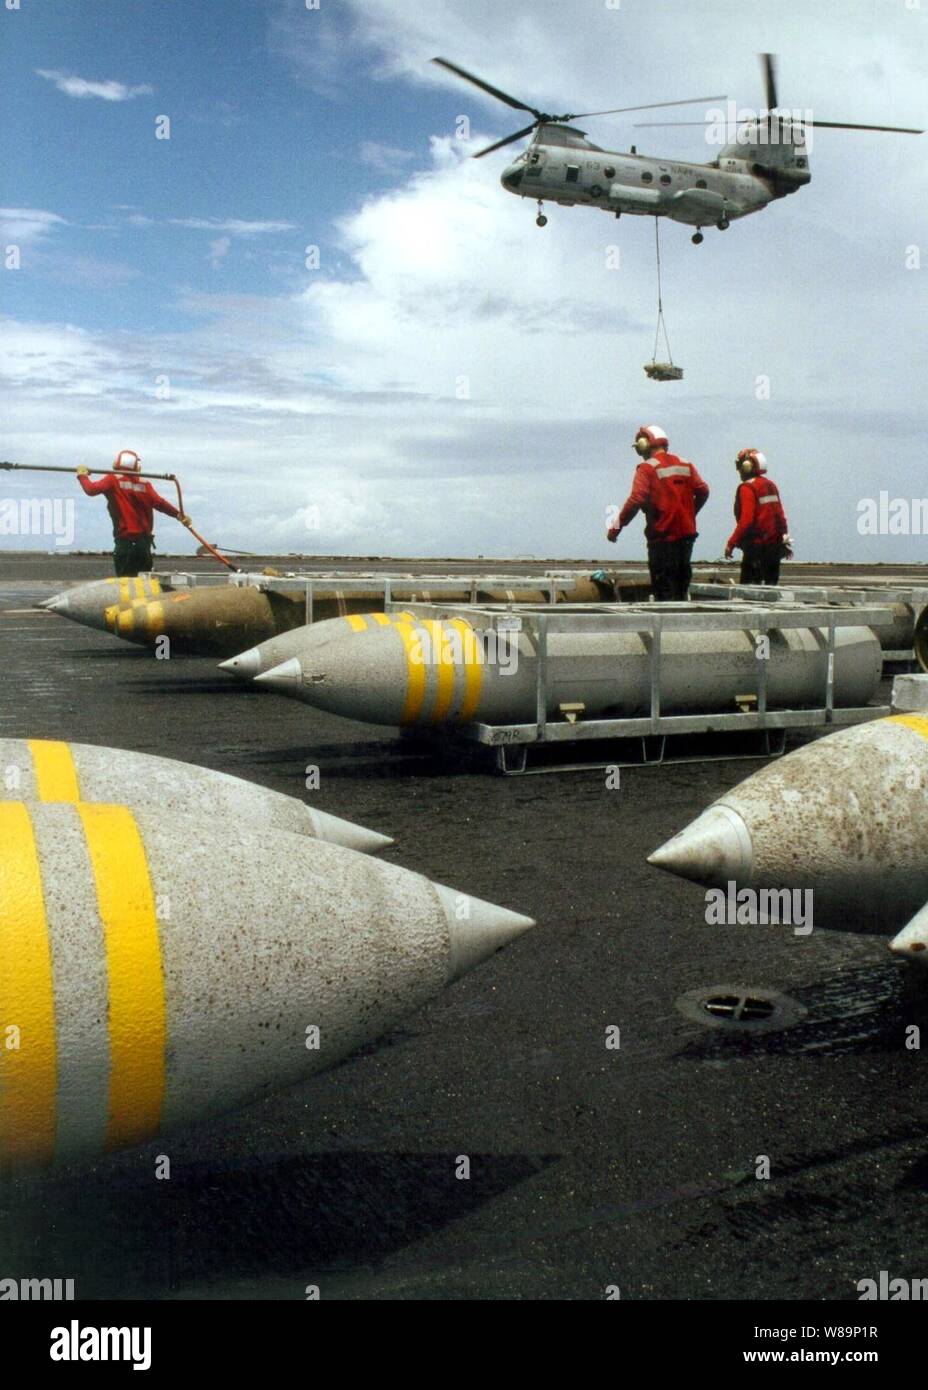 A Navy CH-46 Sea Knight helicopter delivers another pallet of bombs to the flight deck of the USS John F. Kennedy (CV 67) during an ammunition onload evolution with the USNS Mount Baker (T-AE 34) as the ships operate in the Atlantic Ocean on July 22, 2001.  Red-shirted aviation ordnancemen will move the pallets of bombs from the flight deck to the shipХs magazines below decks for storage. Stock Photo